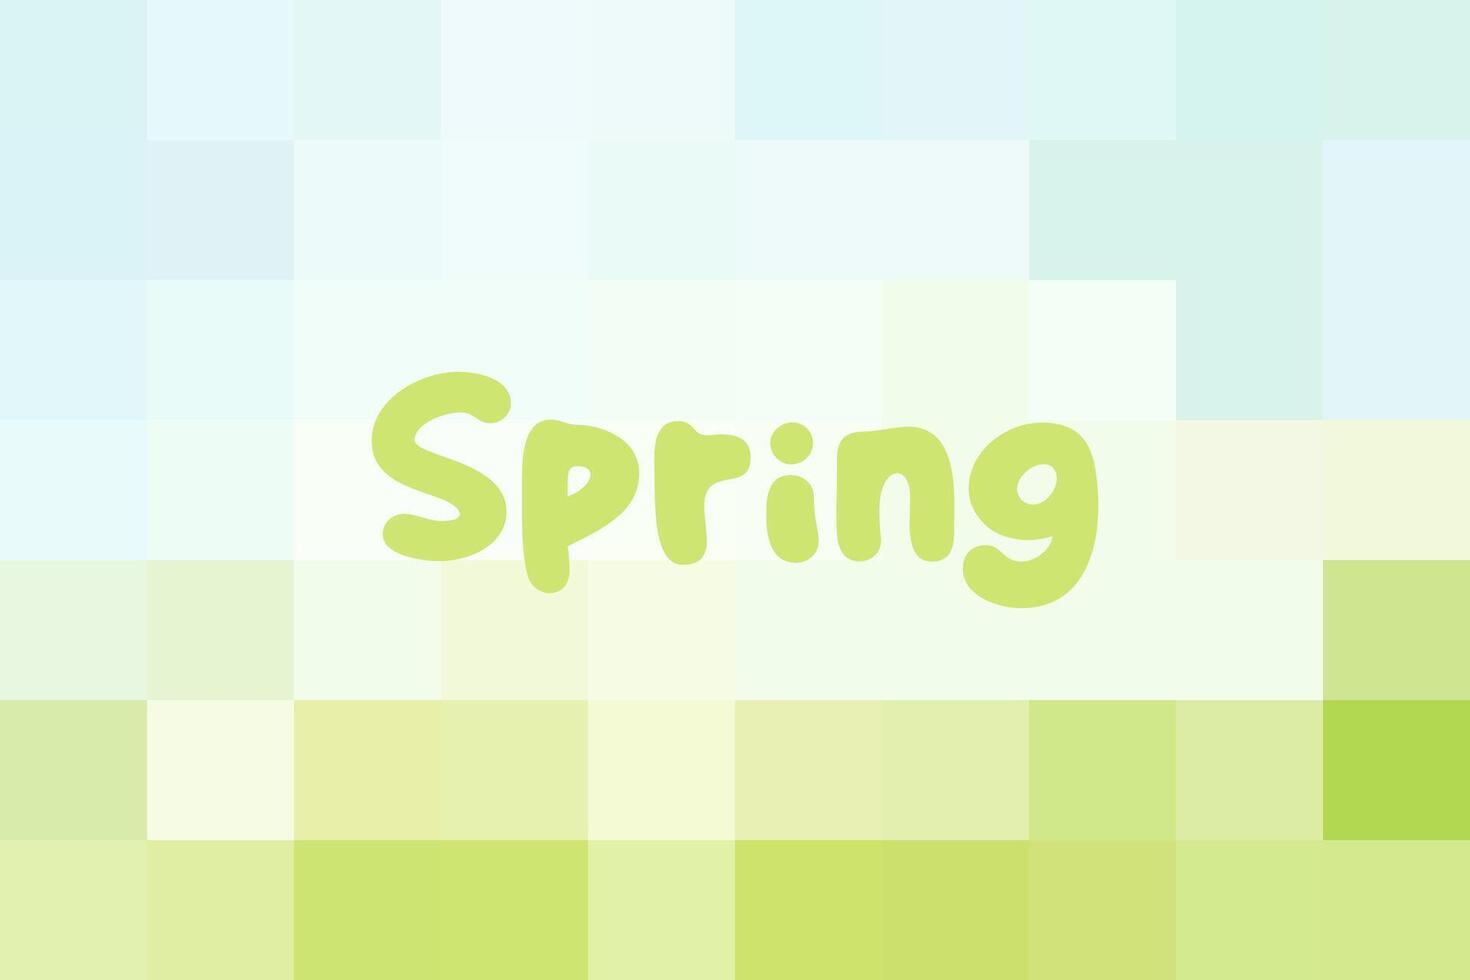 pixel spring backdrop. vector illustration. abstract background of geometric shapes.